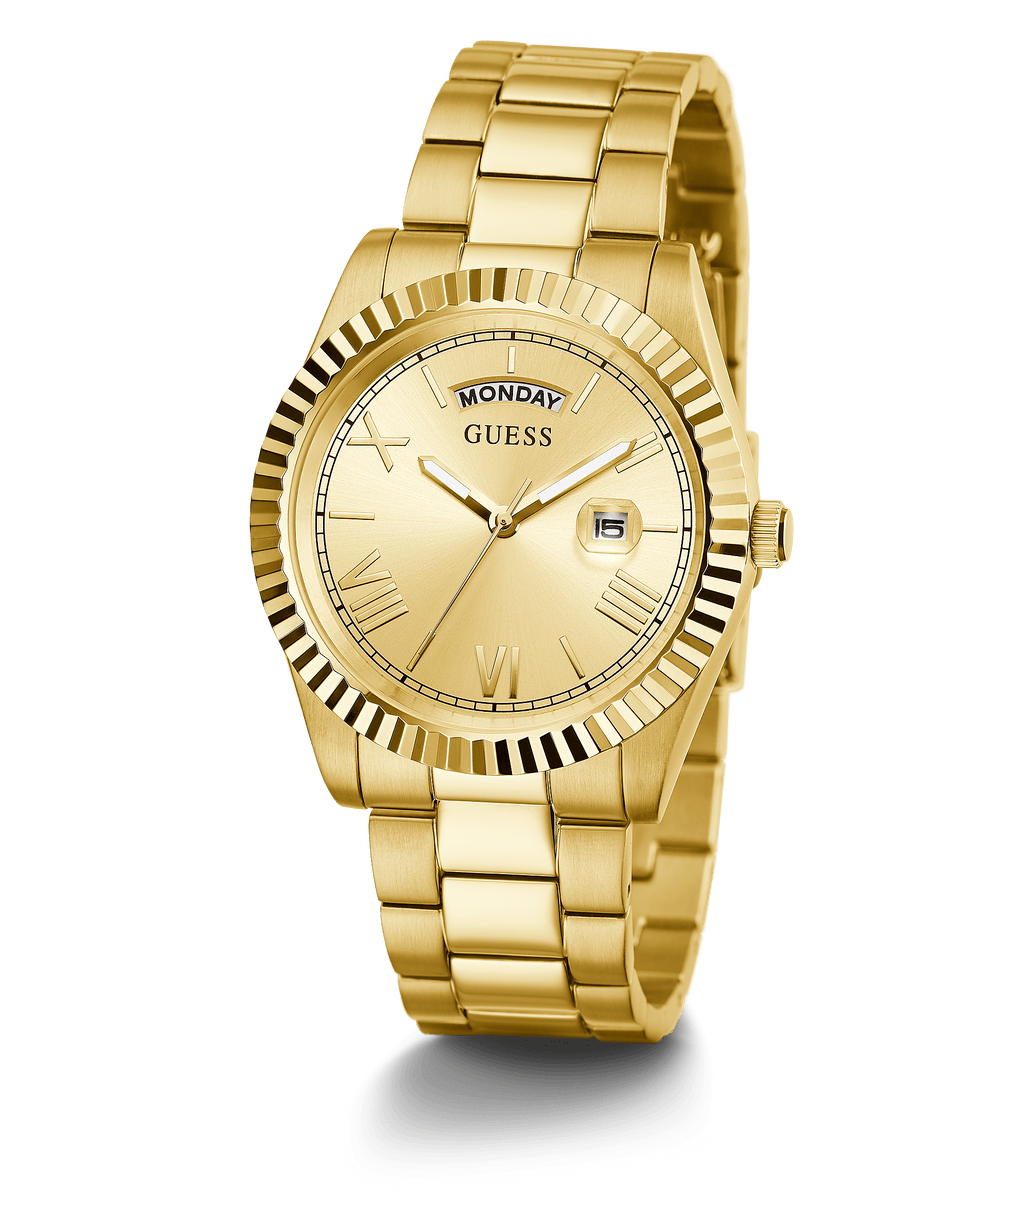 Guess Connoisseur Gold Tone Stainless Watch Watches Steel – GW0265G2 America of